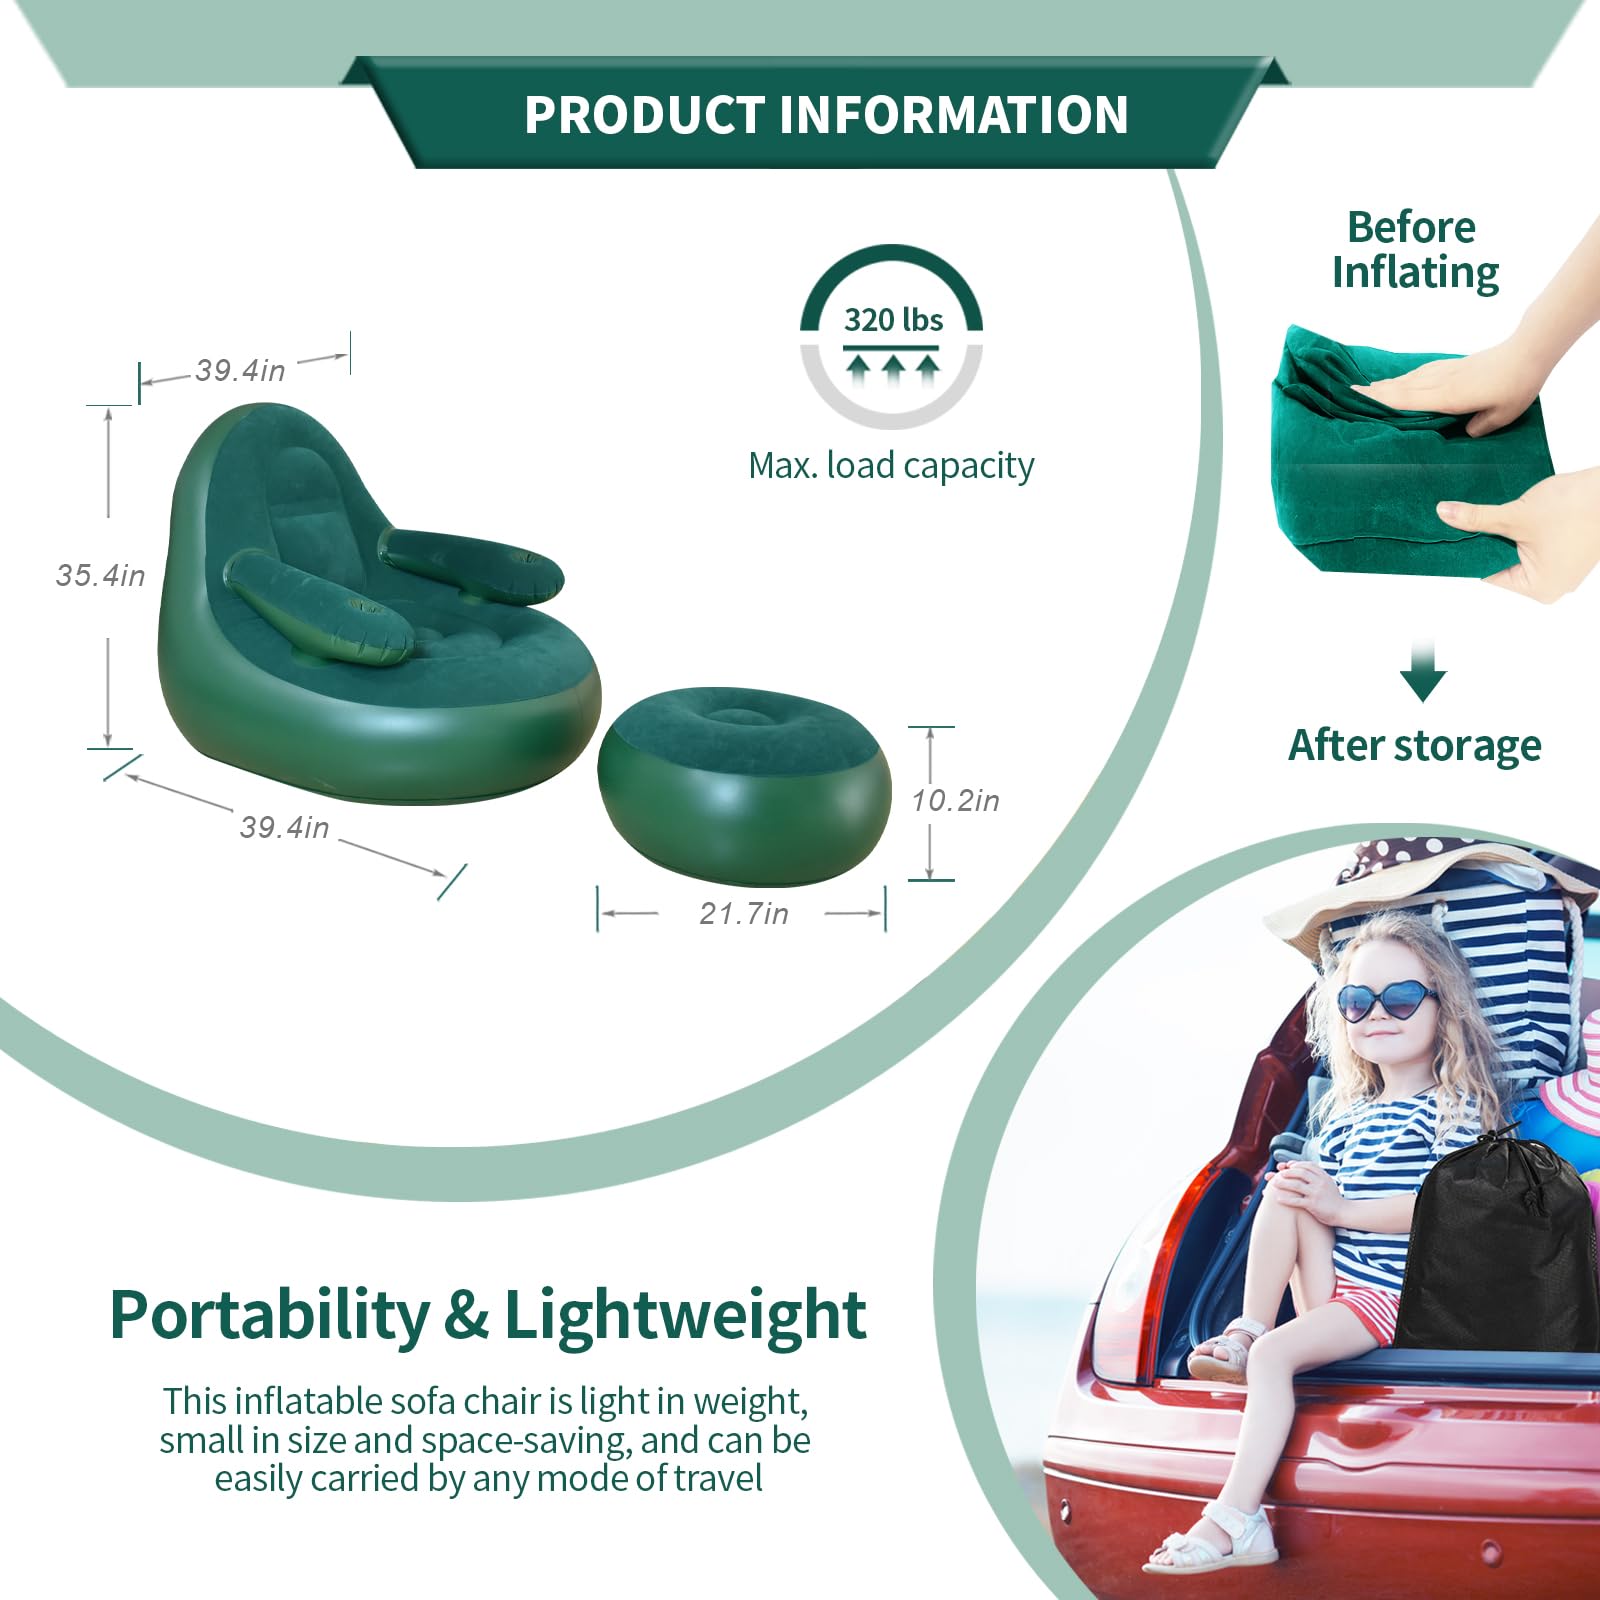 Inflatable Couch,Blow Up Chair,Portable Lounger Chair,Inflatable Chair with Armrest ＆Cup Holder,Inflatable Furniture for Camping,Fishing,Party,Beach,Sunbathing,Hiking